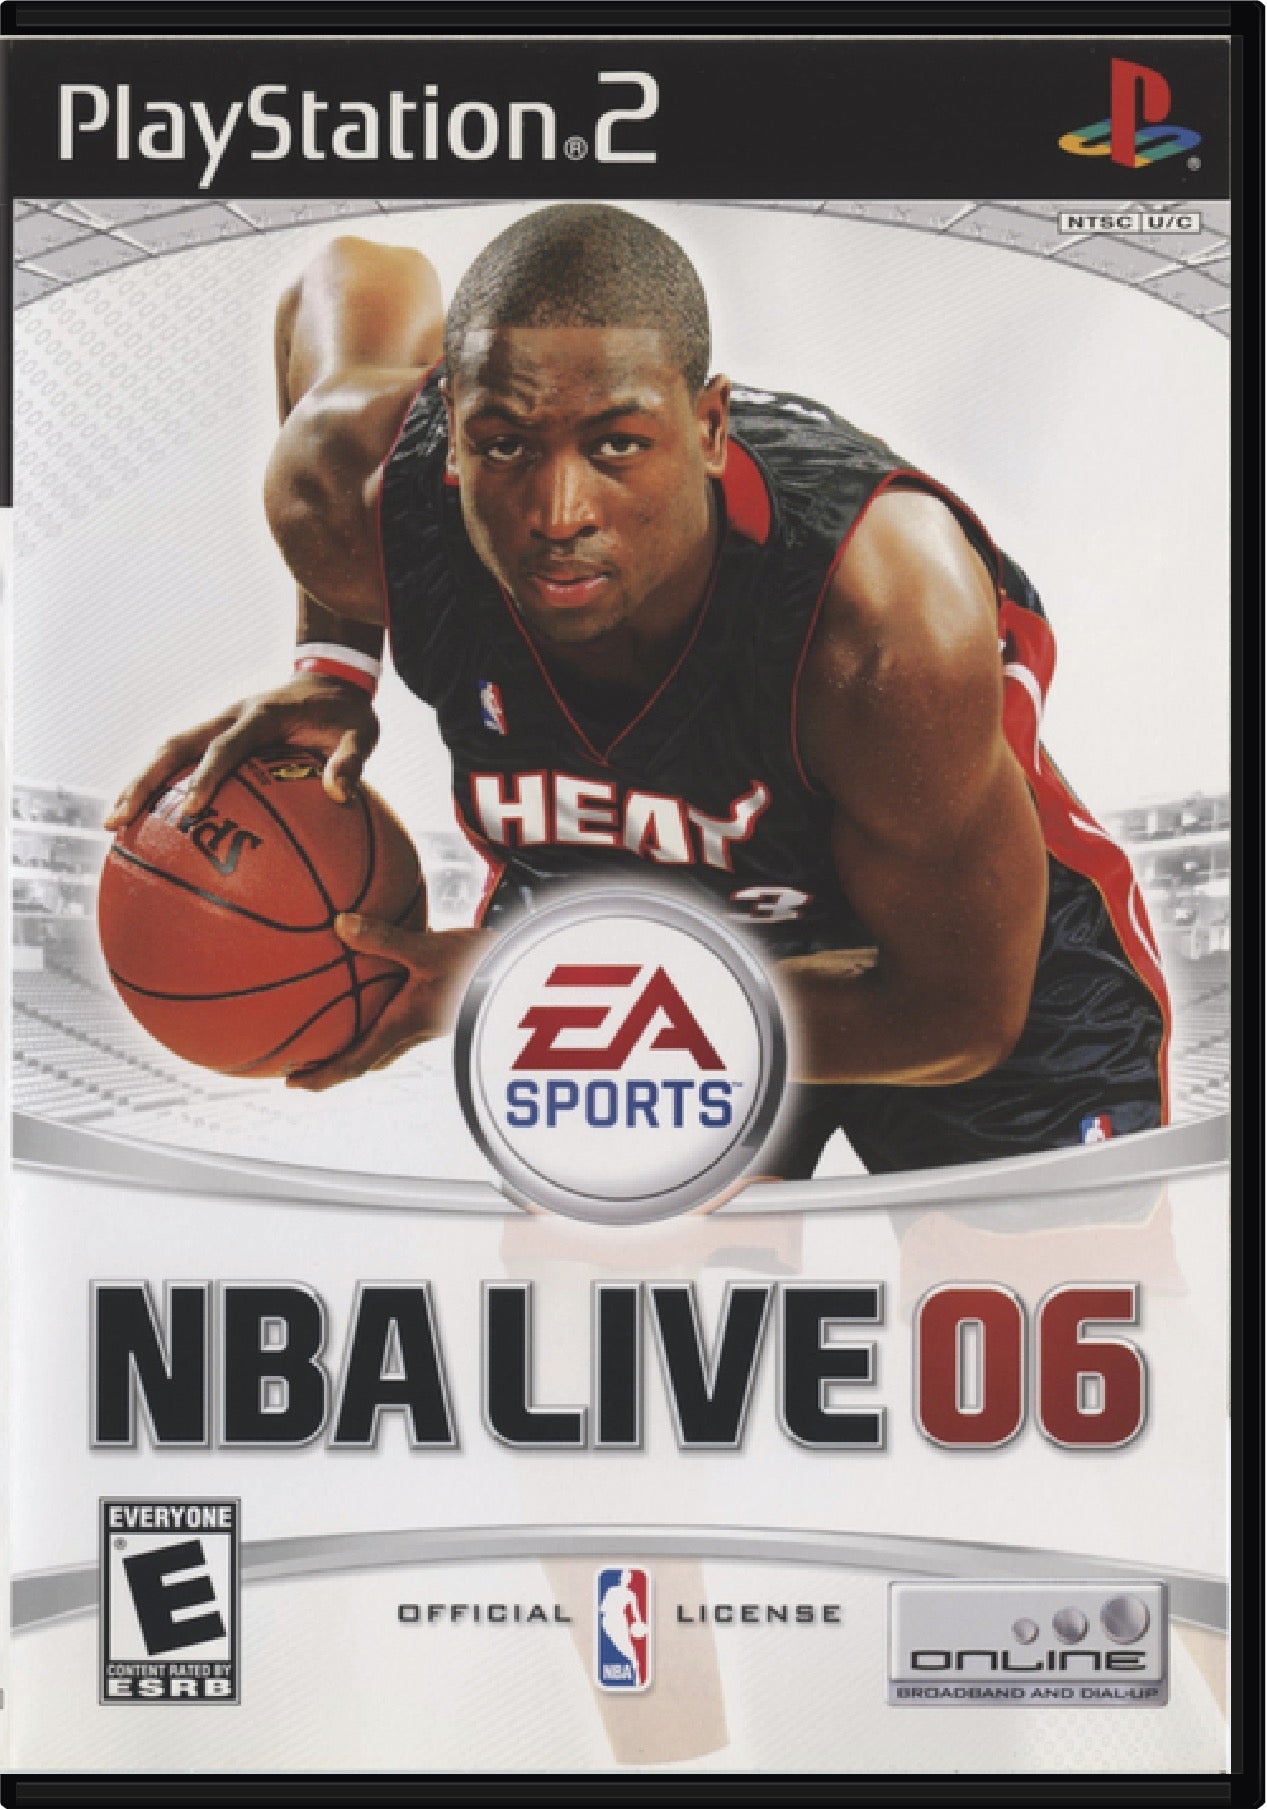 NBA Live 06 Cover Art and Product Photo